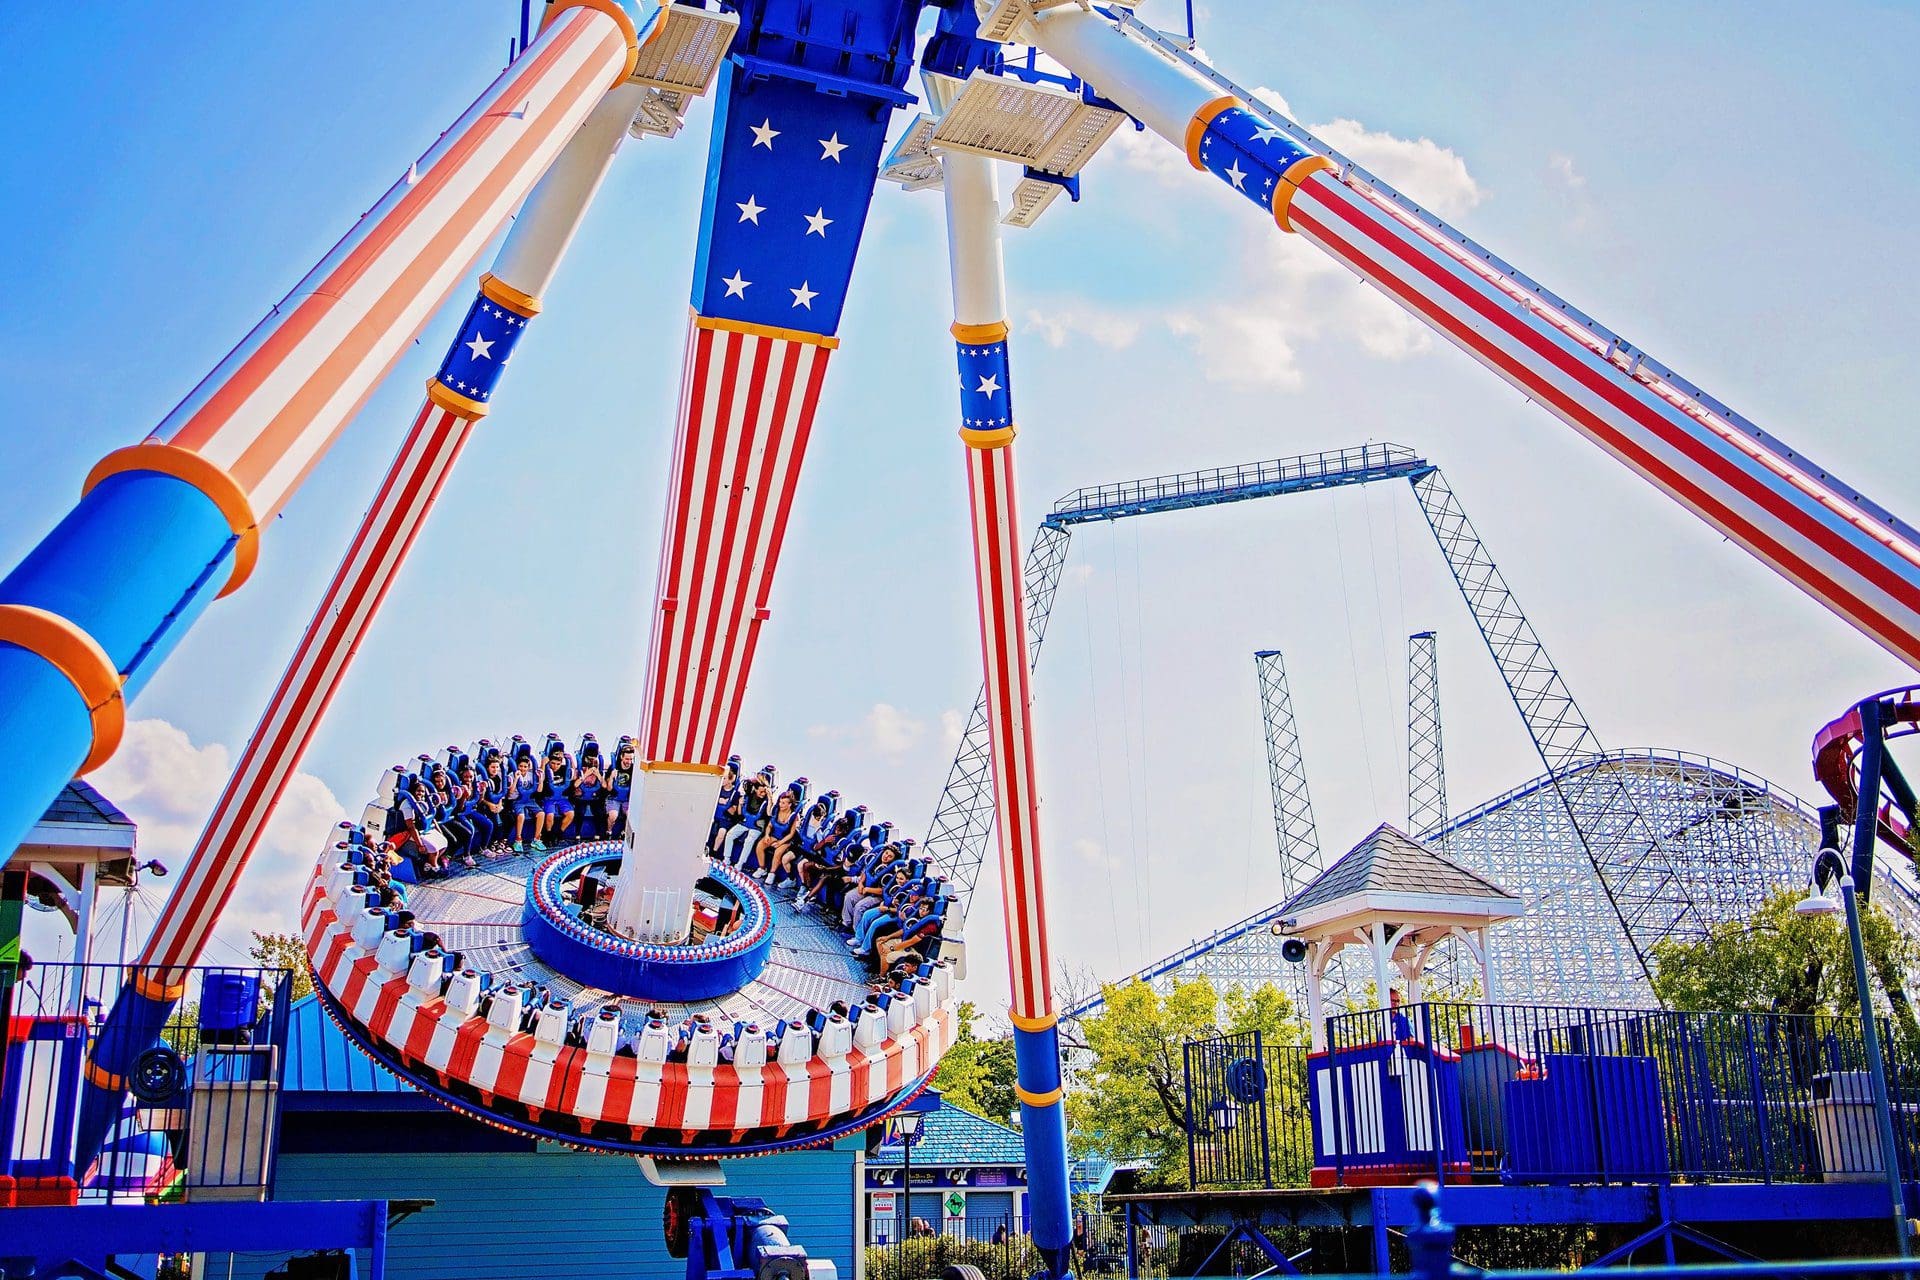 Guests on the revolution ride at Six Flags Great America, one of the best kids activities near Chicago.